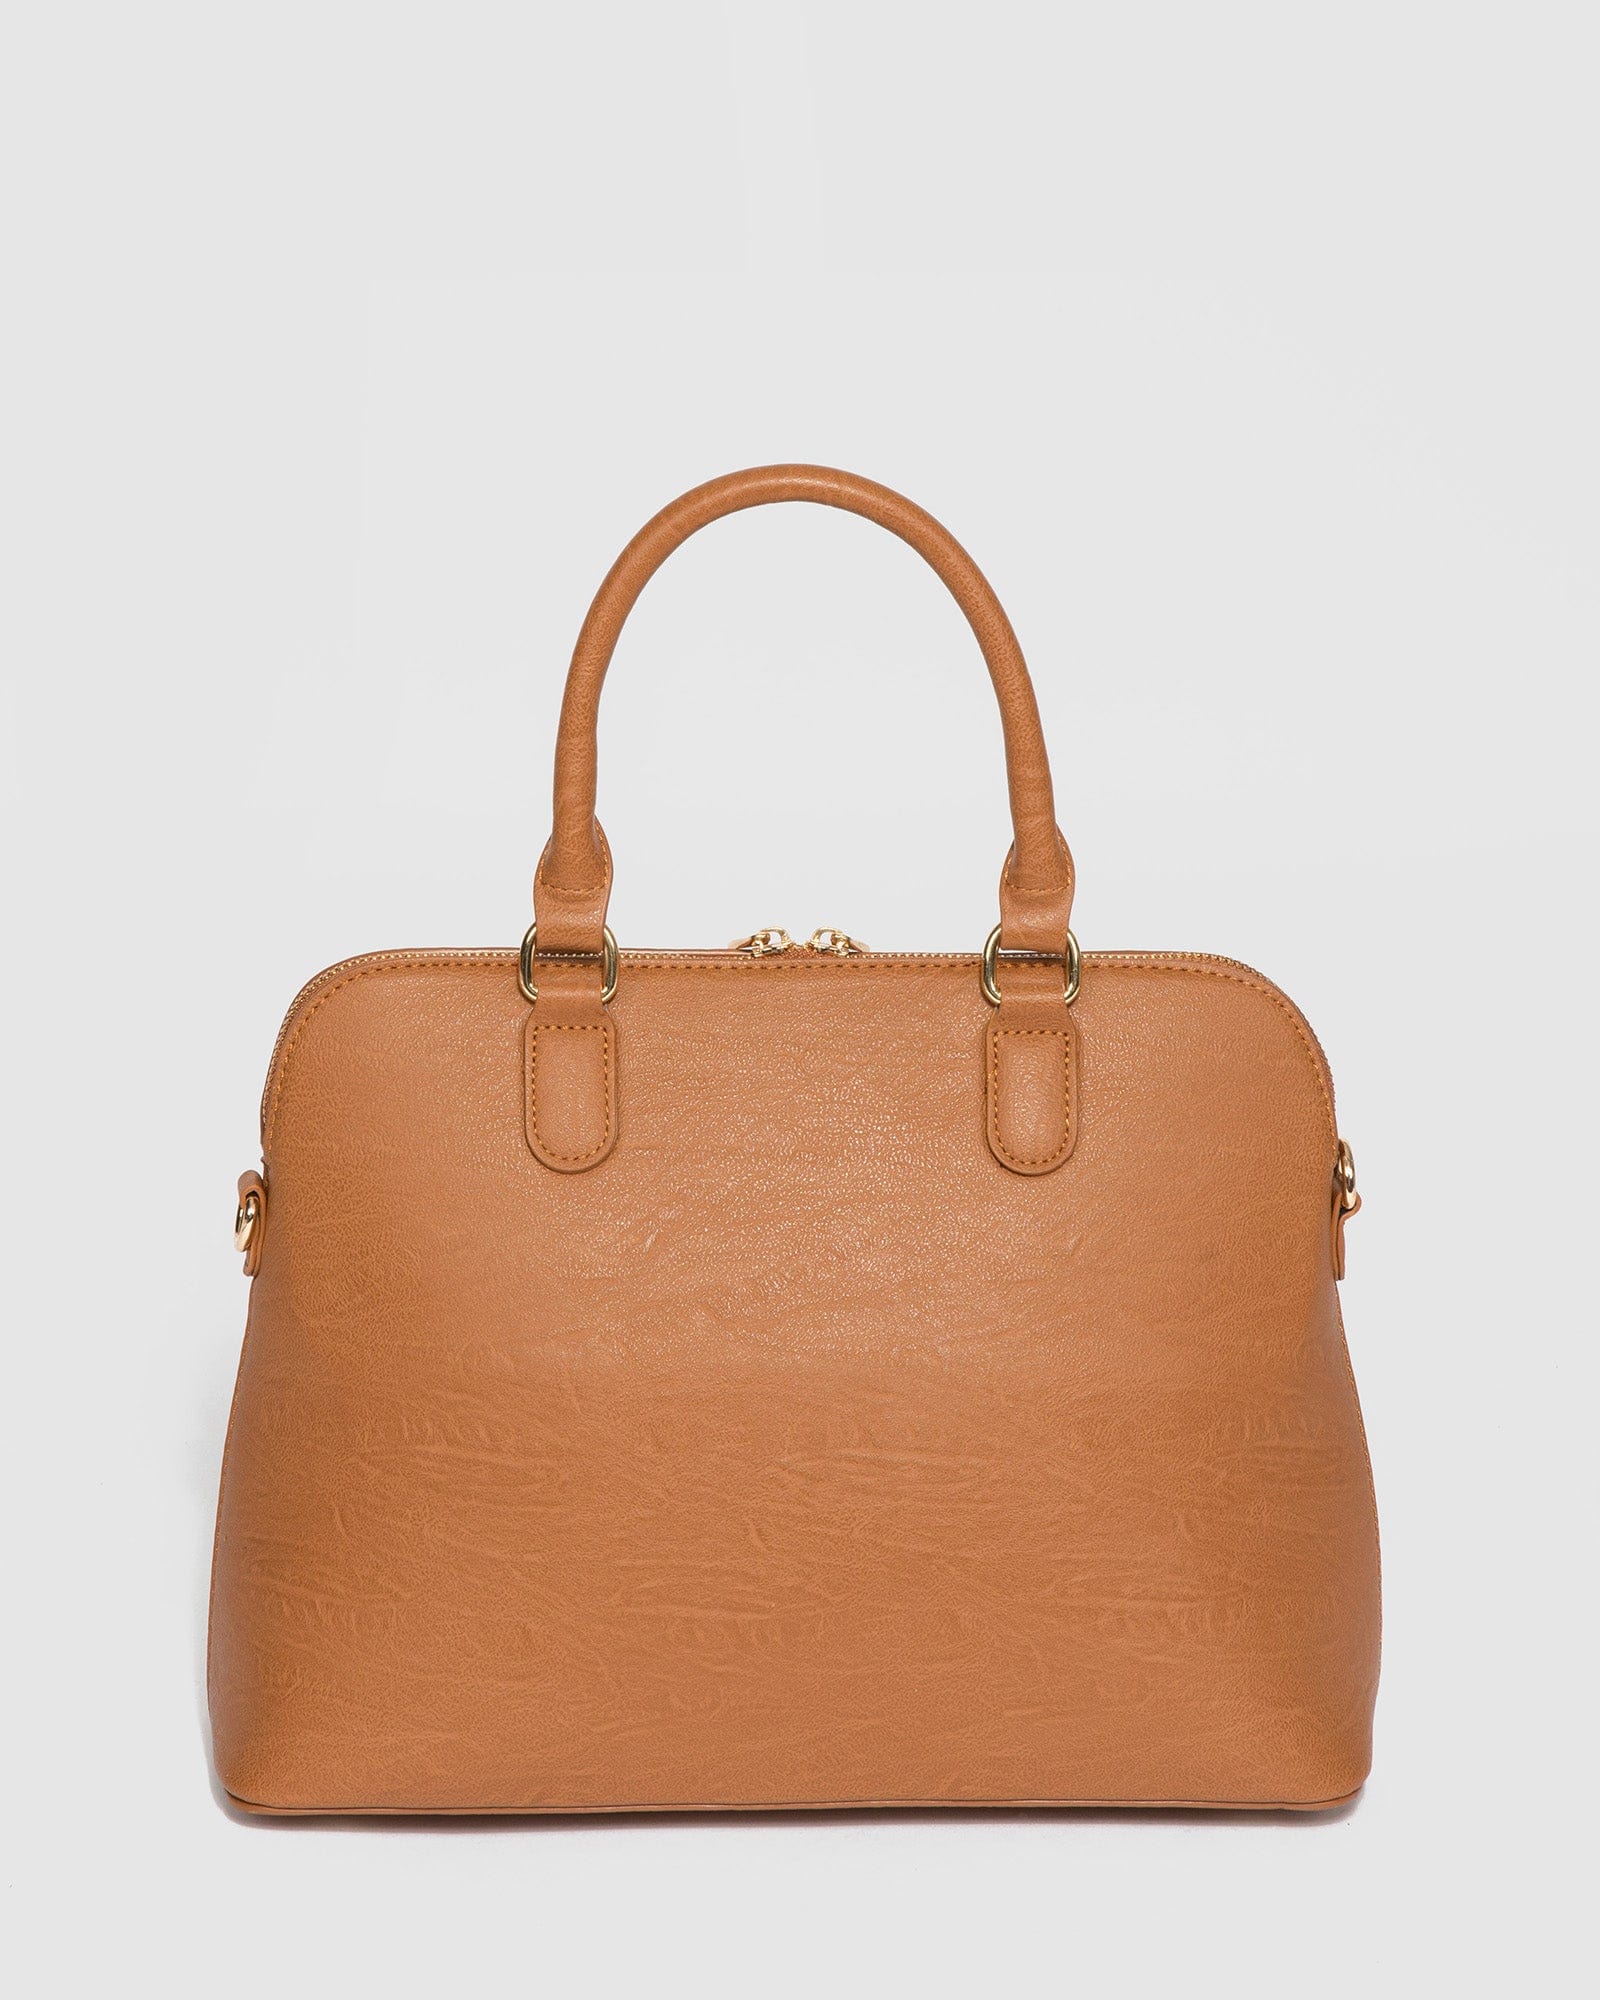 100% Leather Bags In Colette by Colette Hayman Limited Edition | Bags,  Leather bag, Fashion handbags